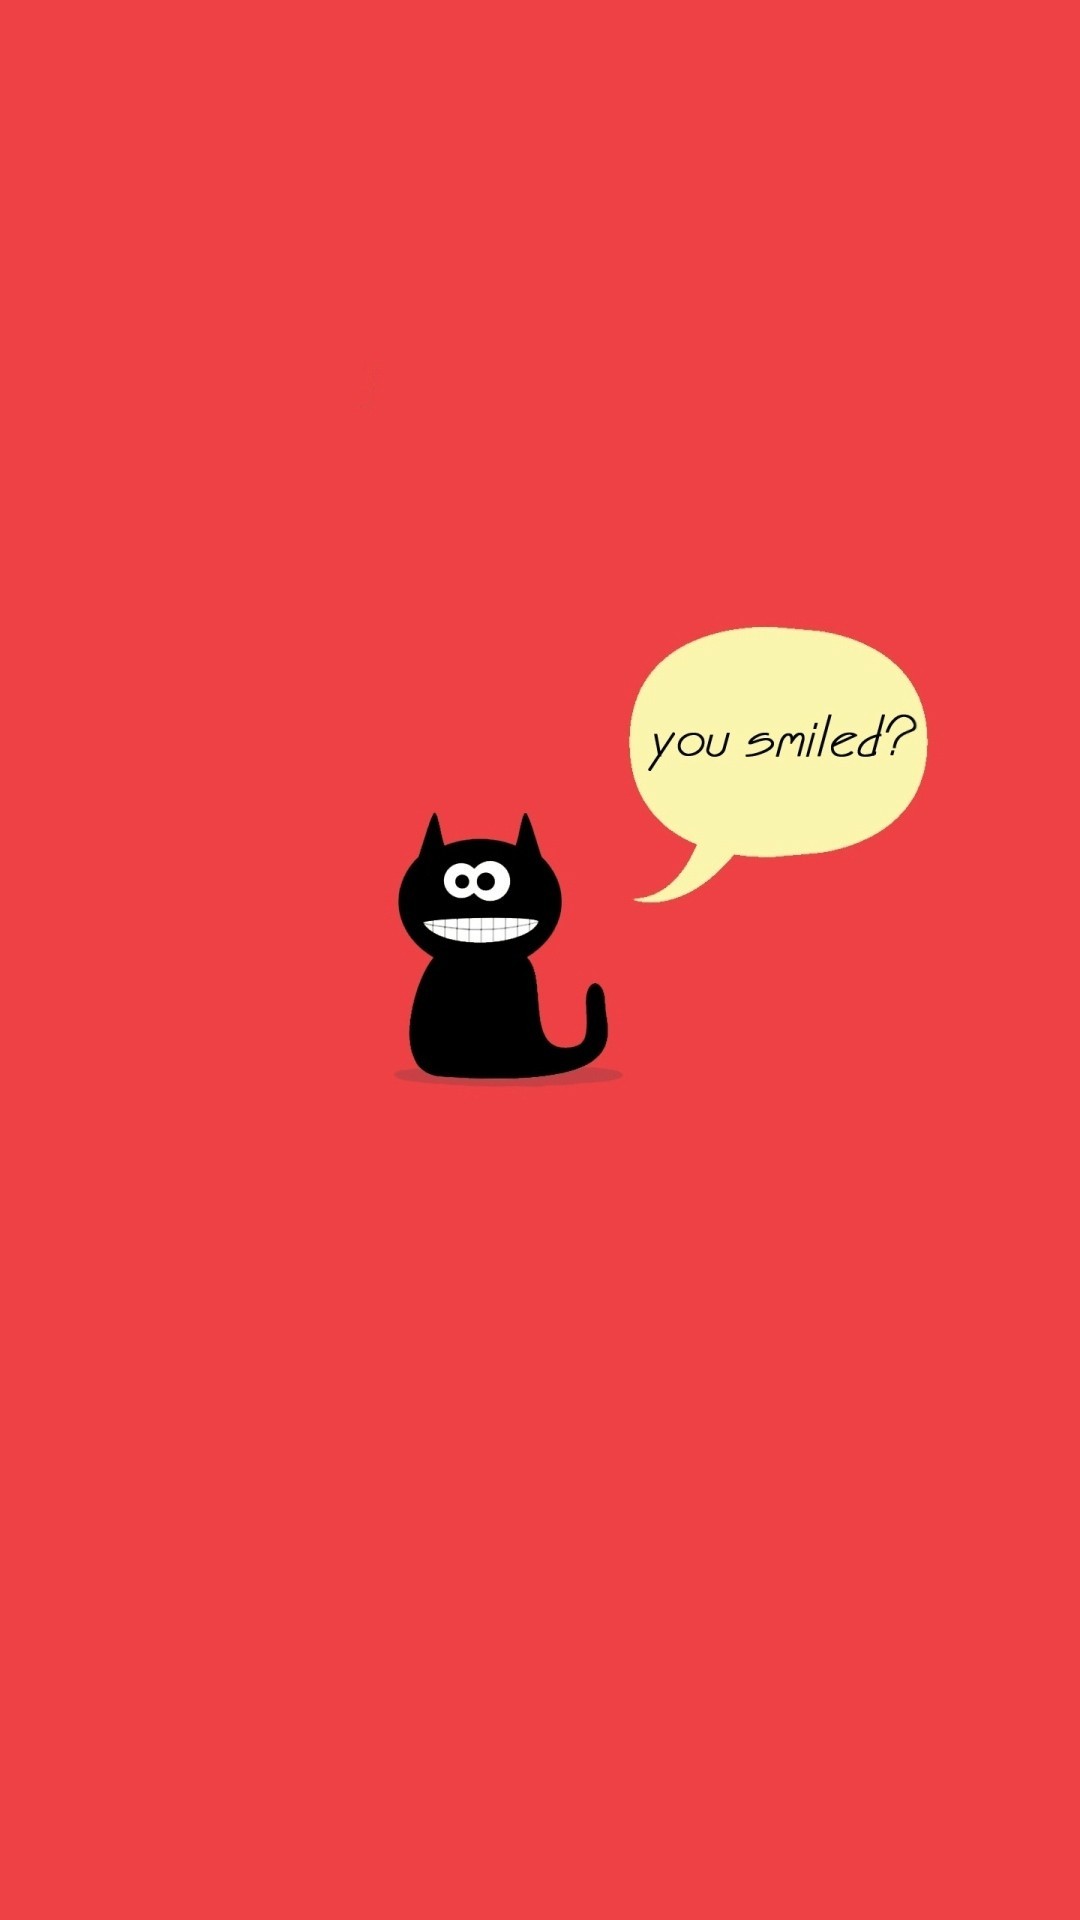 1080x1920 Black-Cute-Smile-Cat-Tap-to-see-more-funny-cartoon-iPhone-backgrounds -and-fondos-mo-wallpaper-wp4003396